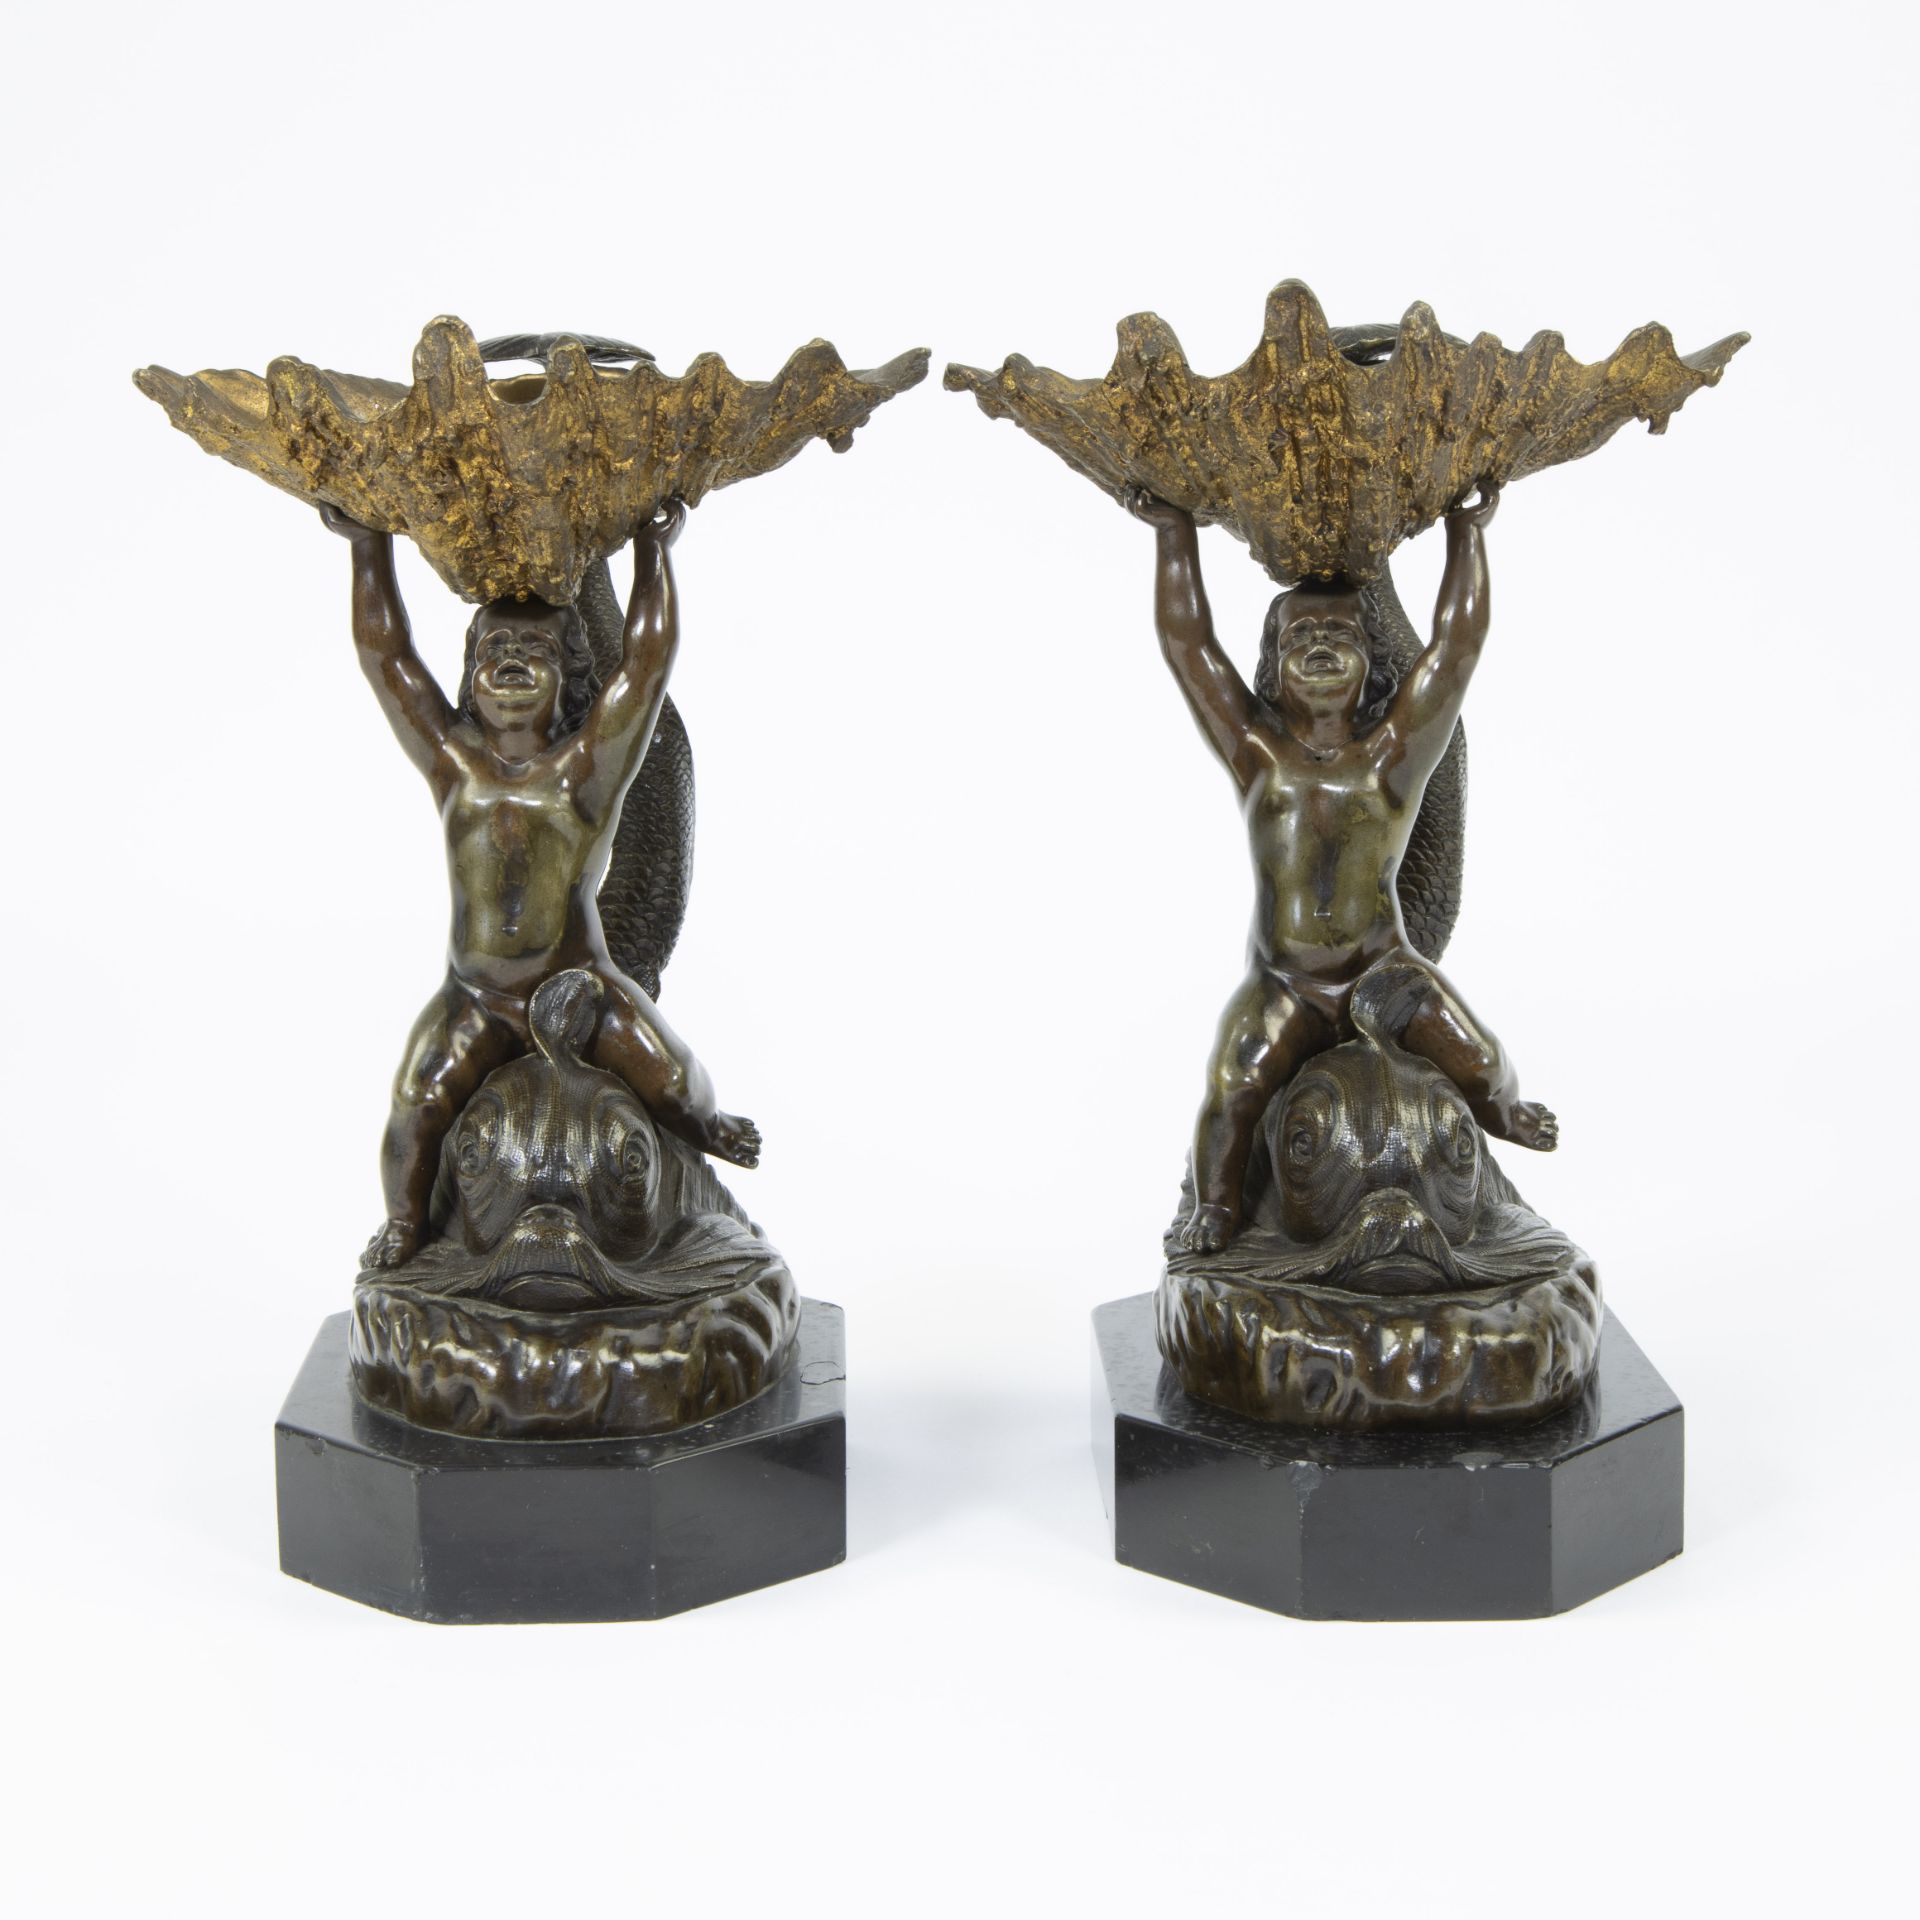 Pair of bronze putti on dolphins, Italian Renaissance, late 18th early 19th century